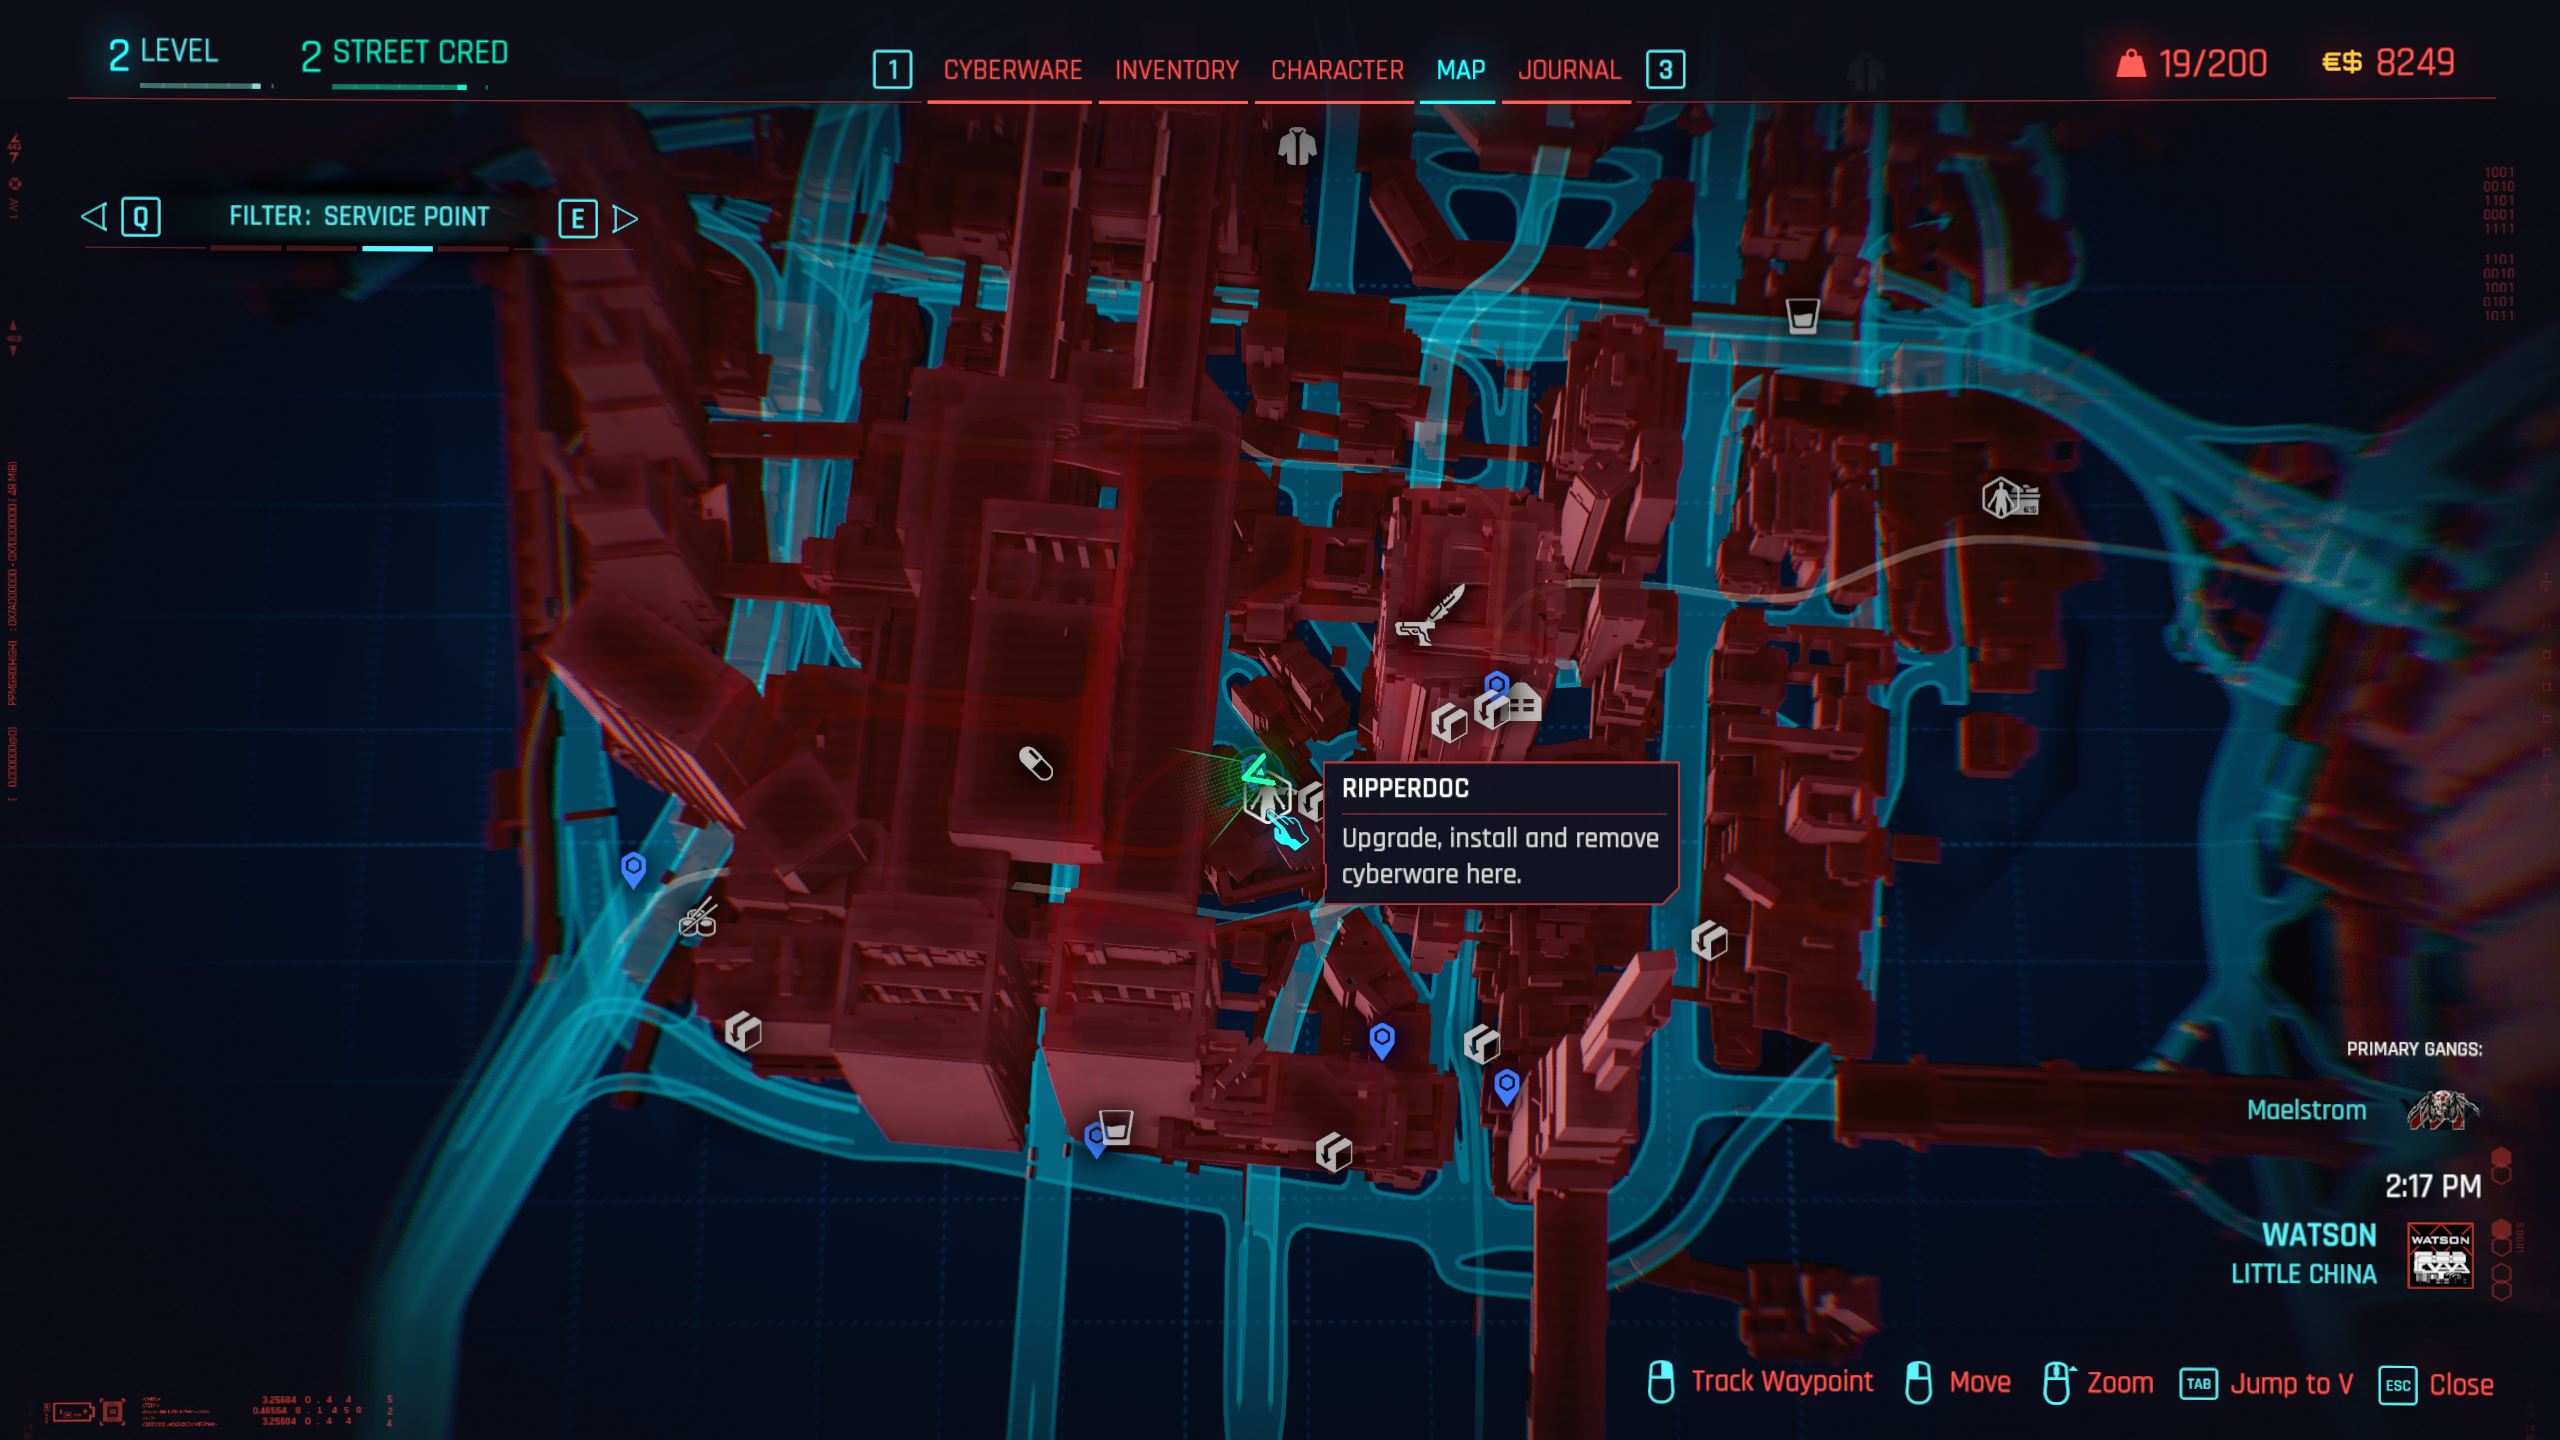 Map location of Viktor Vektor and his clinic in Night City in Cyberpunk 2077.